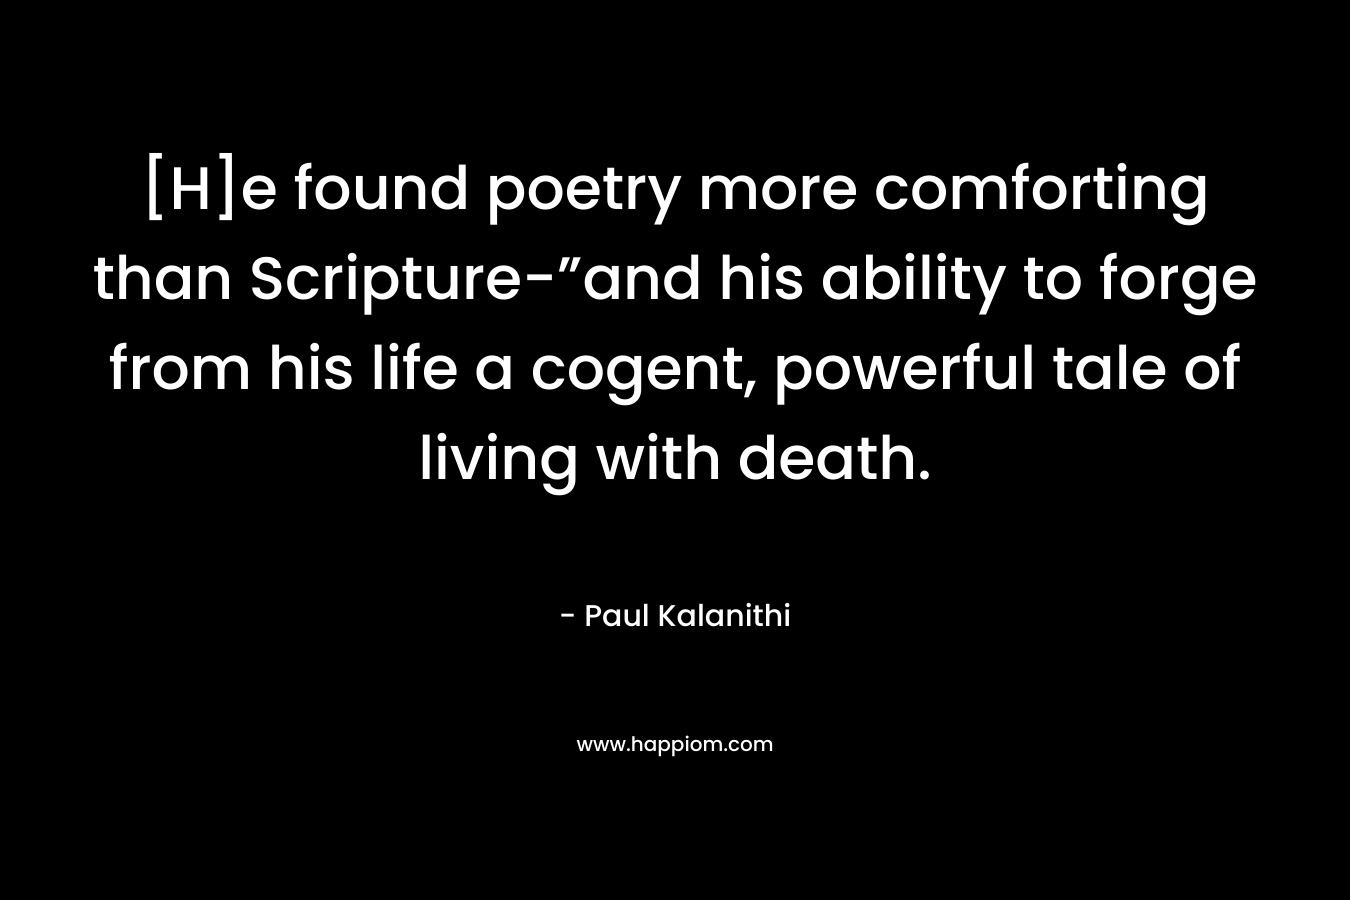 [H]e found poetry more comforting than Scripture-”and his ability to forge from his life a cogent, powerful tale of living with death. – Paul Kalanithi